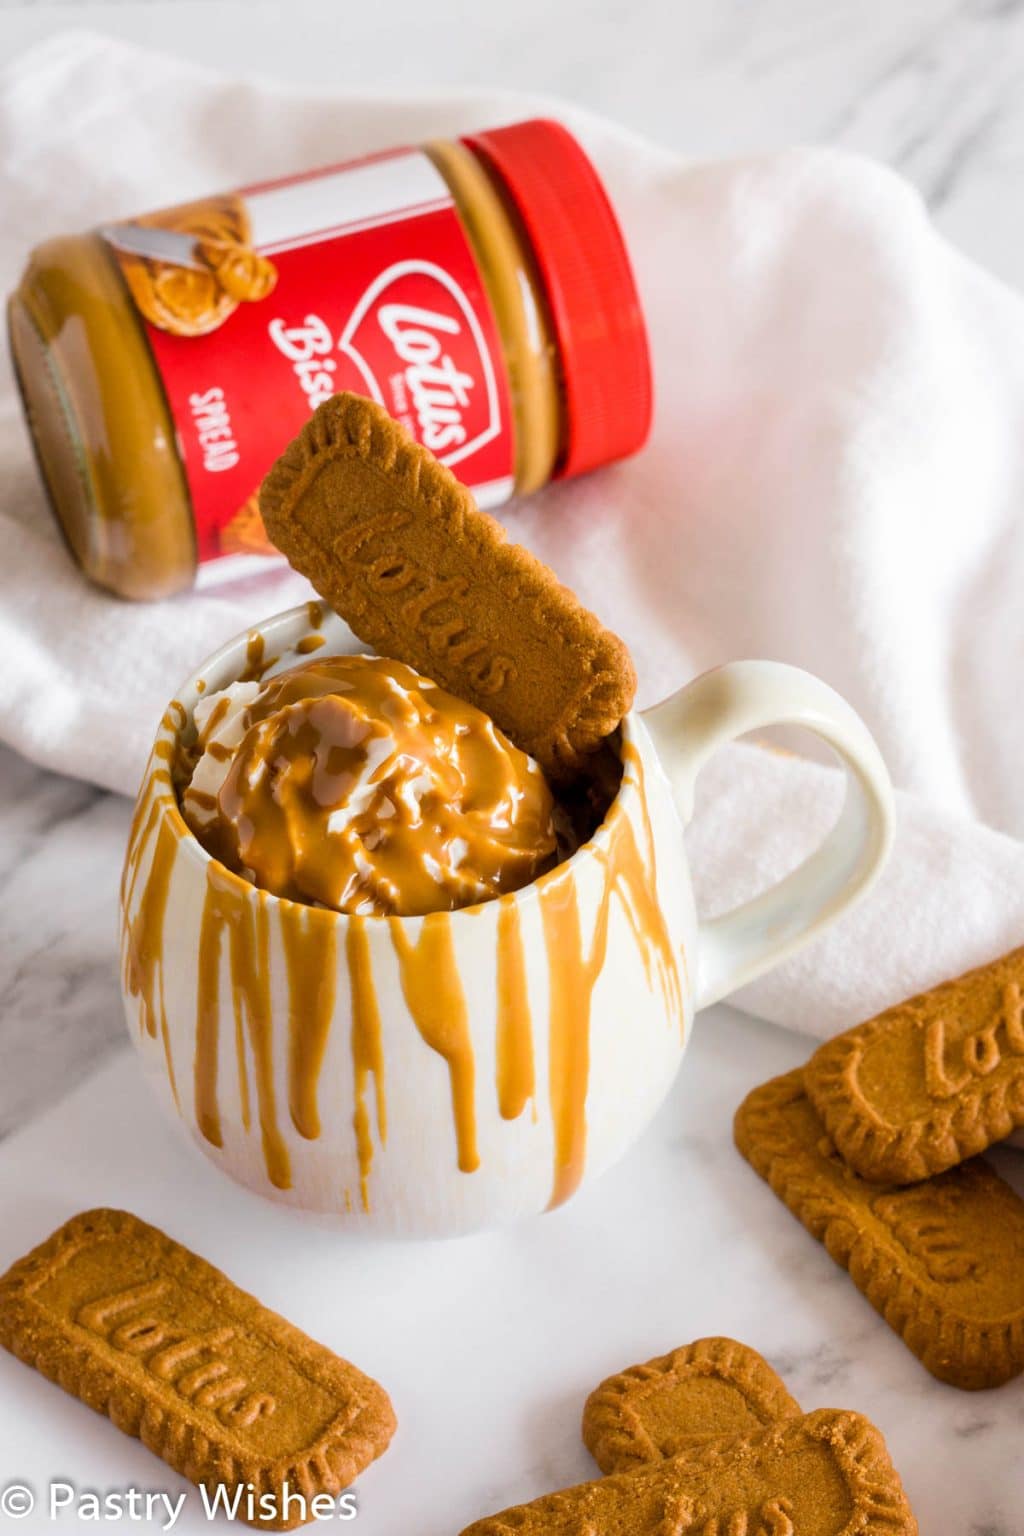 Biscoff mug cake with more cookies in the background.